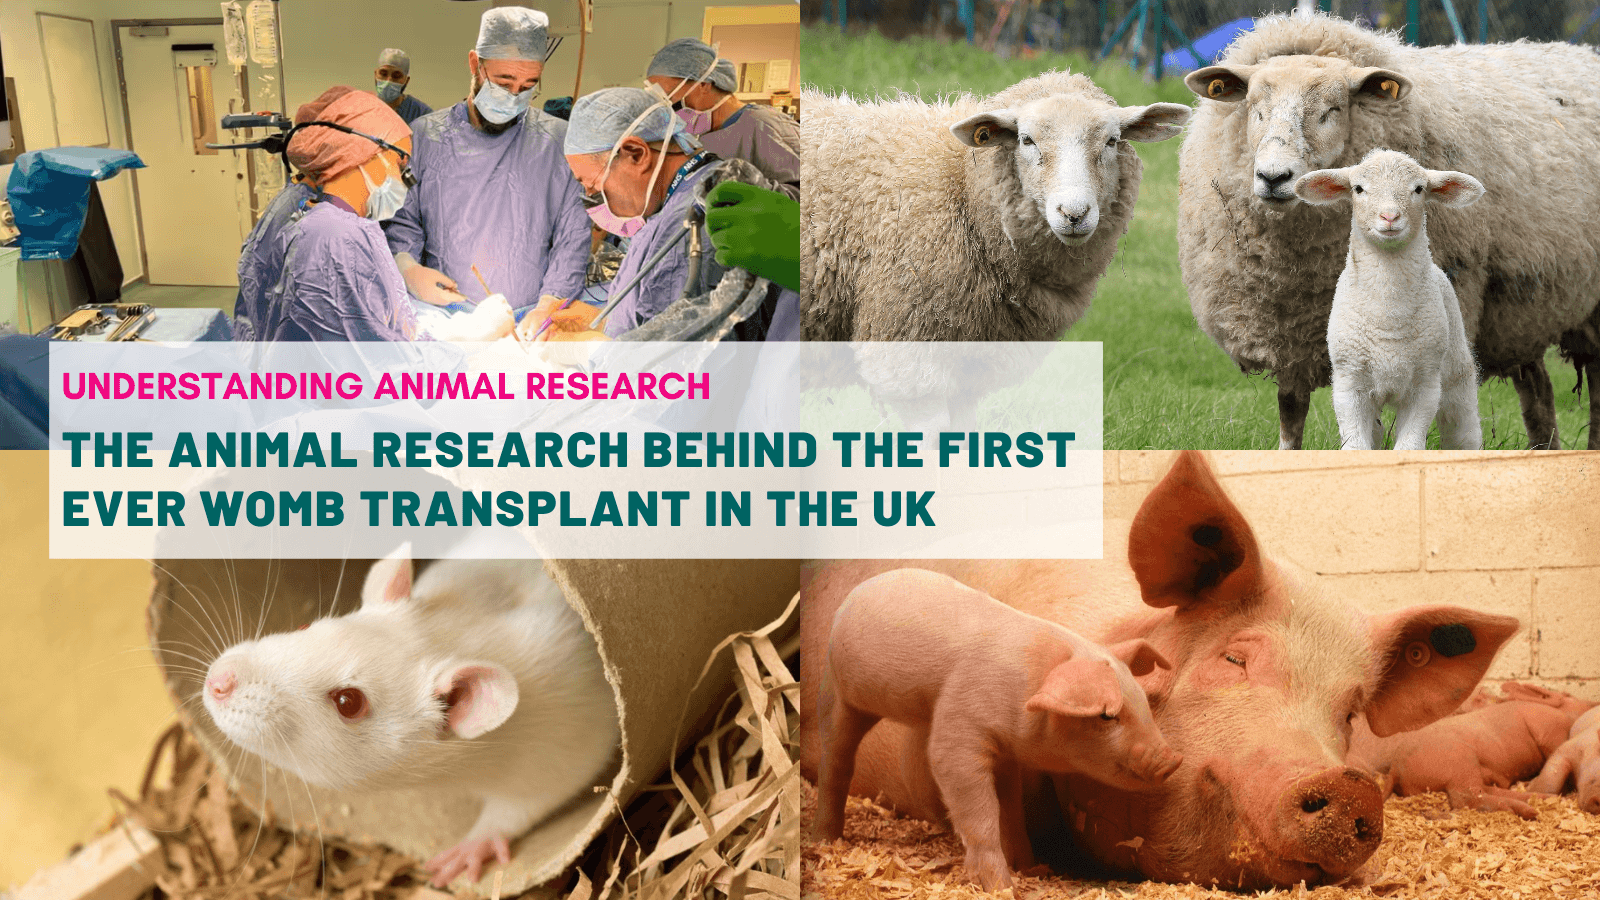 The animal research behind the first ever womb transplant in the UK